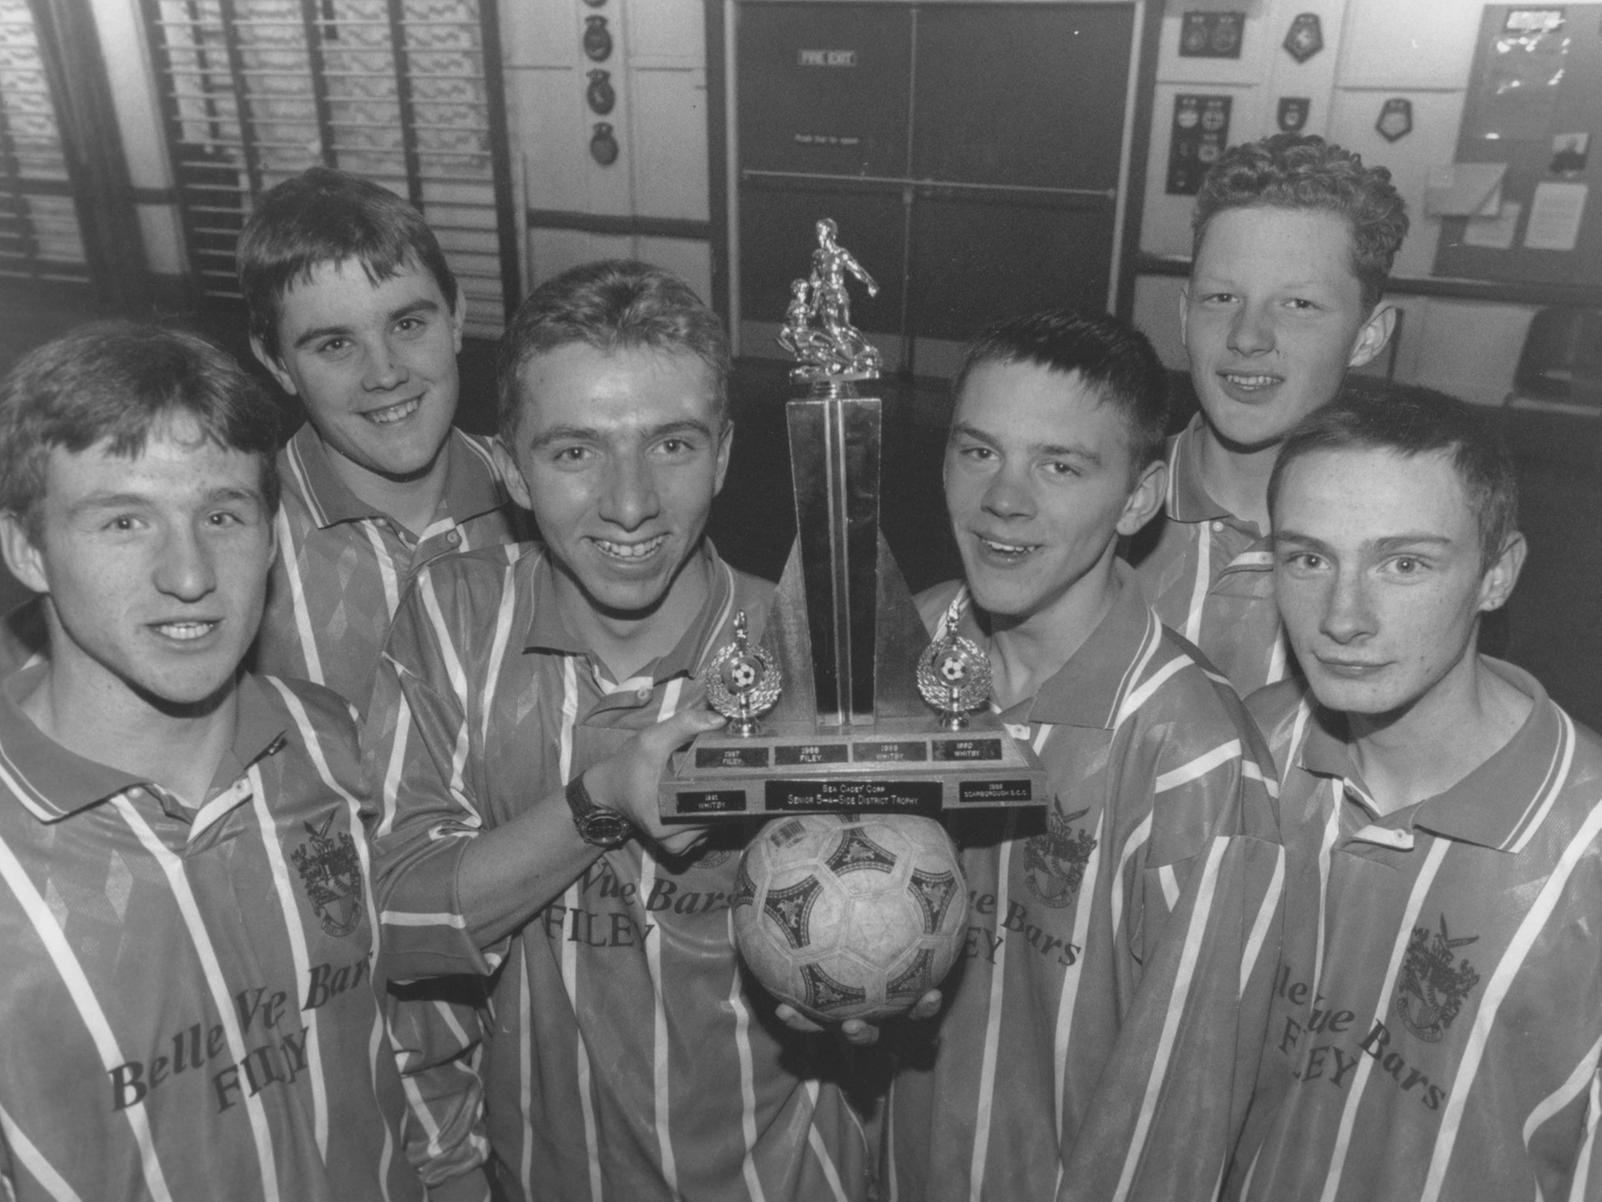 The Filey Sea Cadets winning 5-a-side football team pictured in January 1997, from left, Paul Allick, Jonathon Taylor, Matthew Crosier, Paul Wainwright, George Shardlow and Michael Connell.